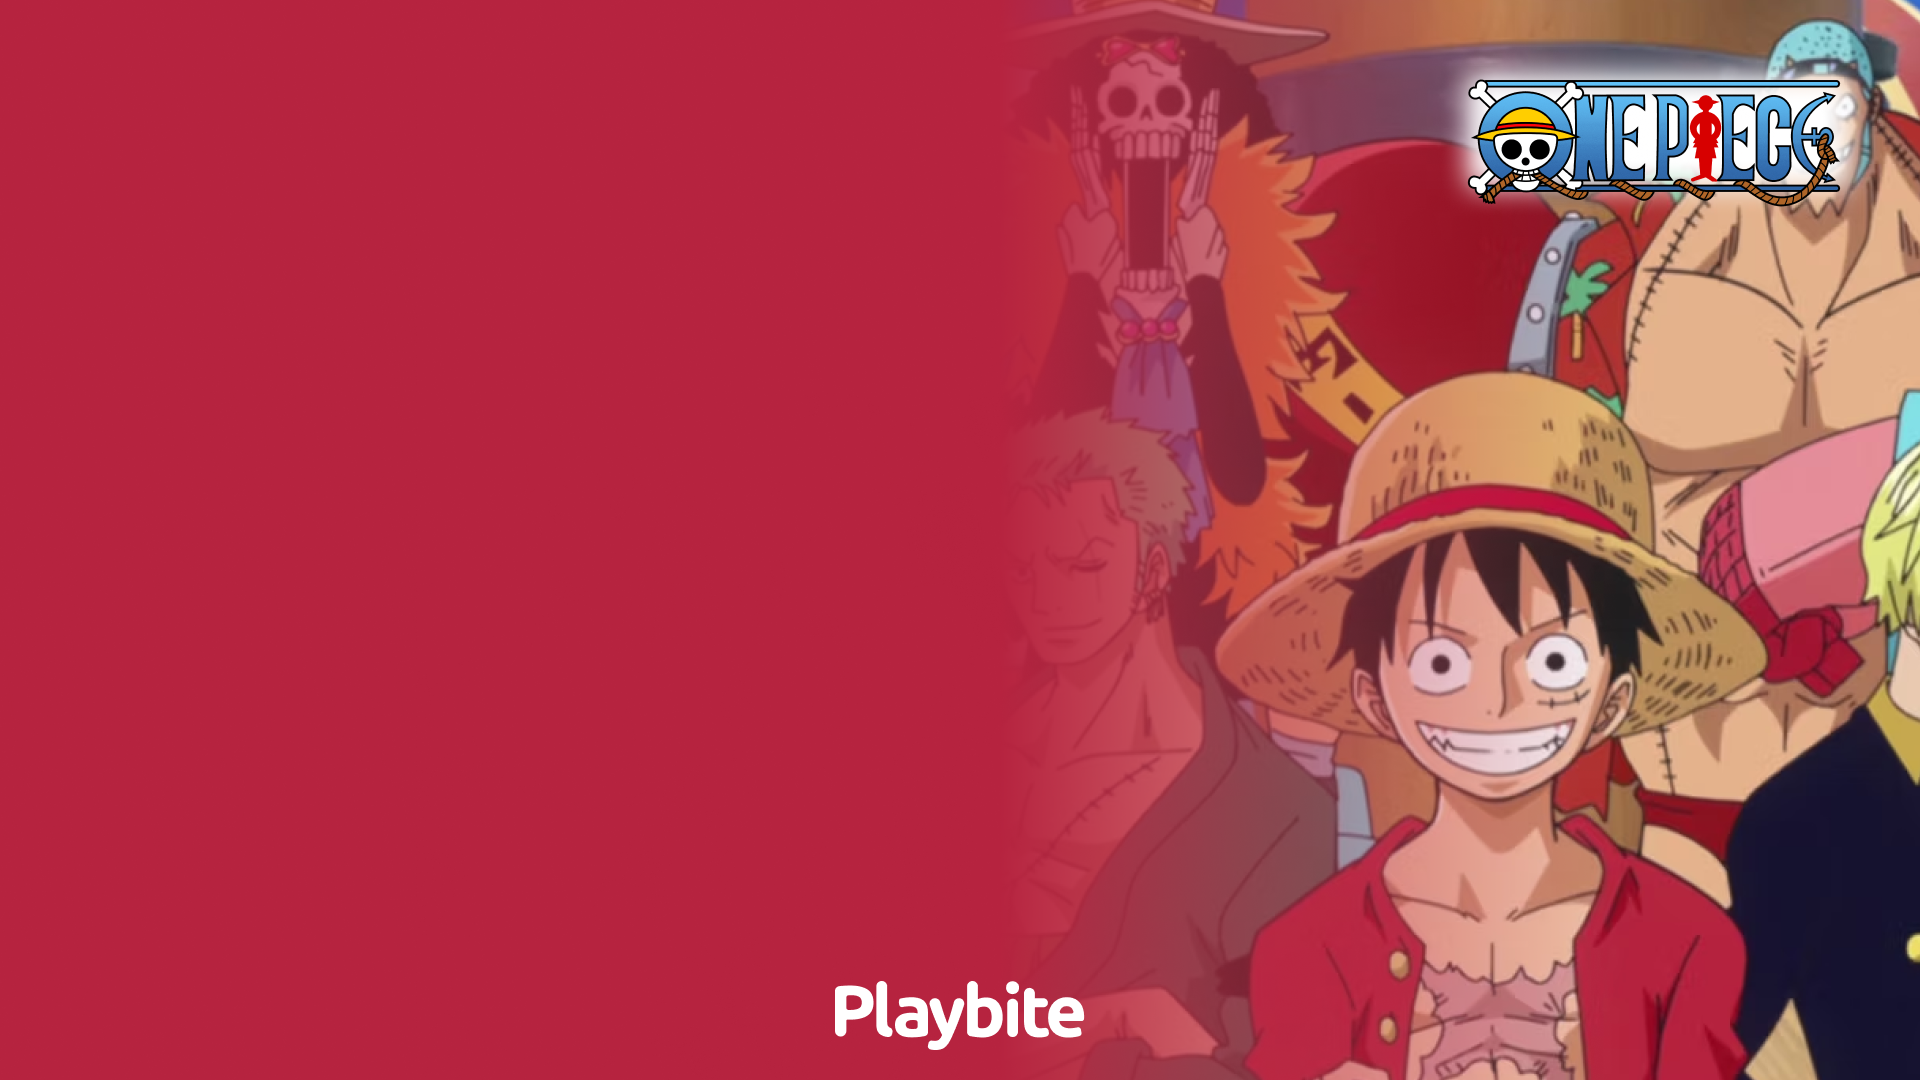 Can I download One Piece on Funimation?